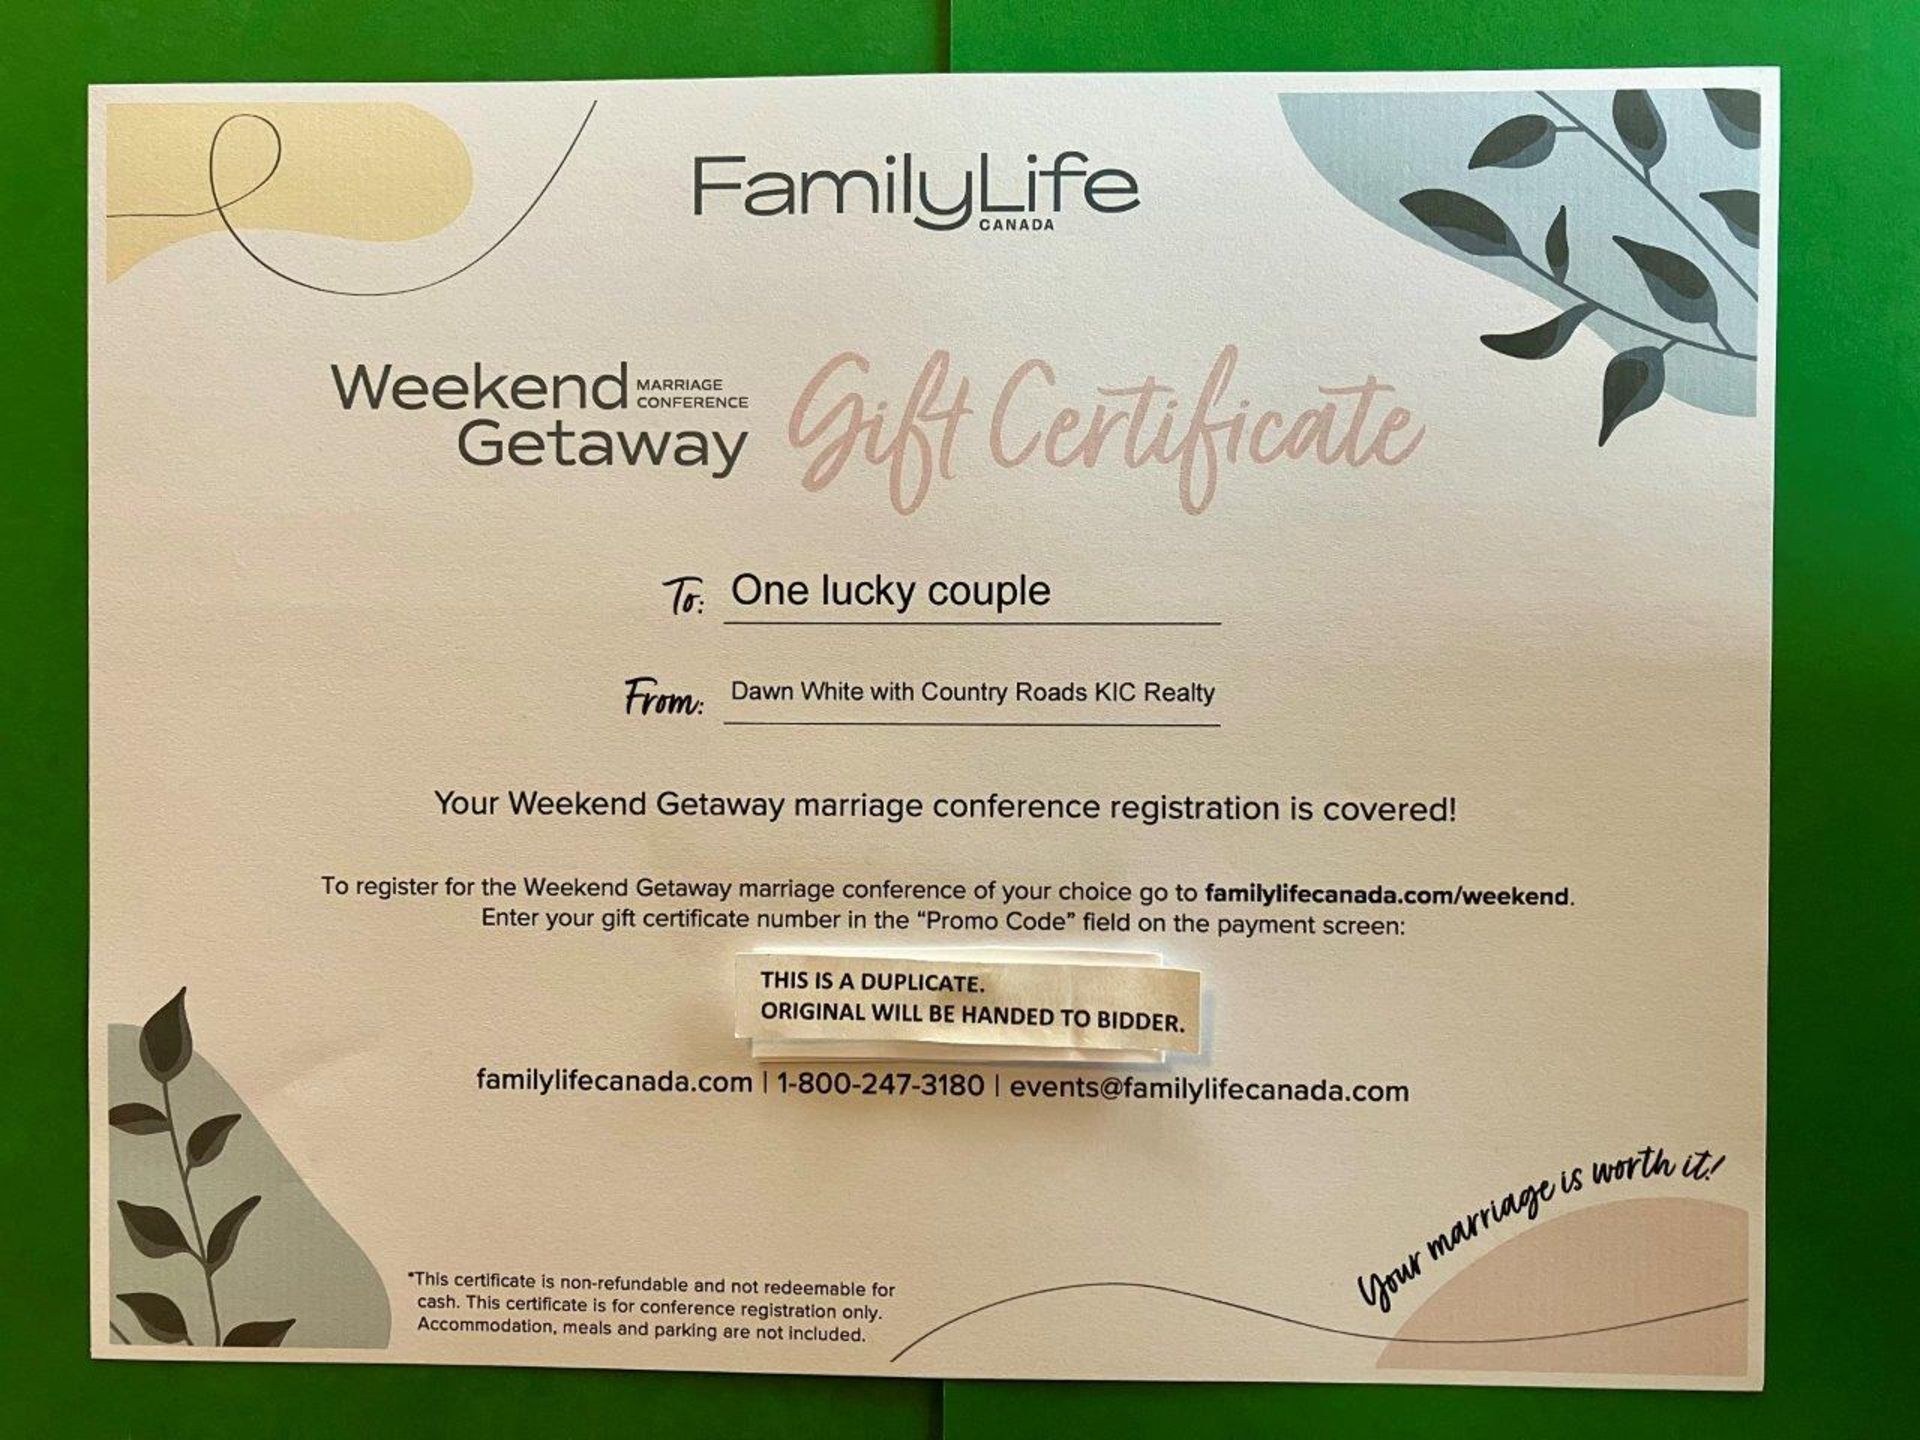 FAMILY LIFE CANADA COUPLES WEEKEND GETAWAY GIFT CERTFICATE